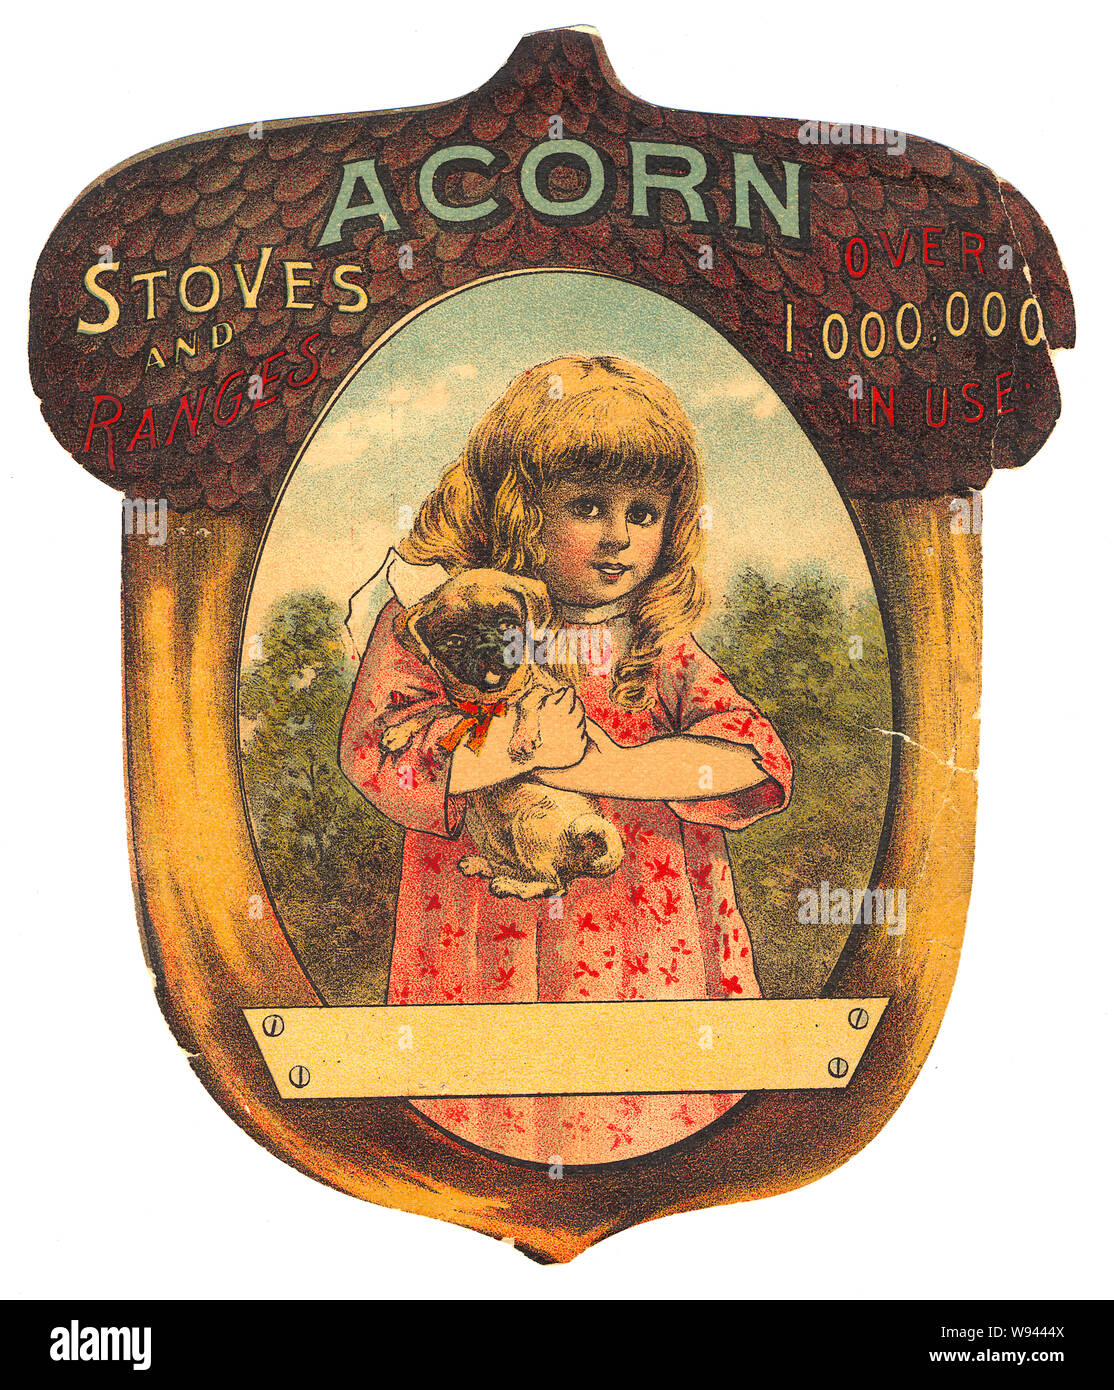 Acorn stoves and ranges - over 1,000,000 in use Stock Photo